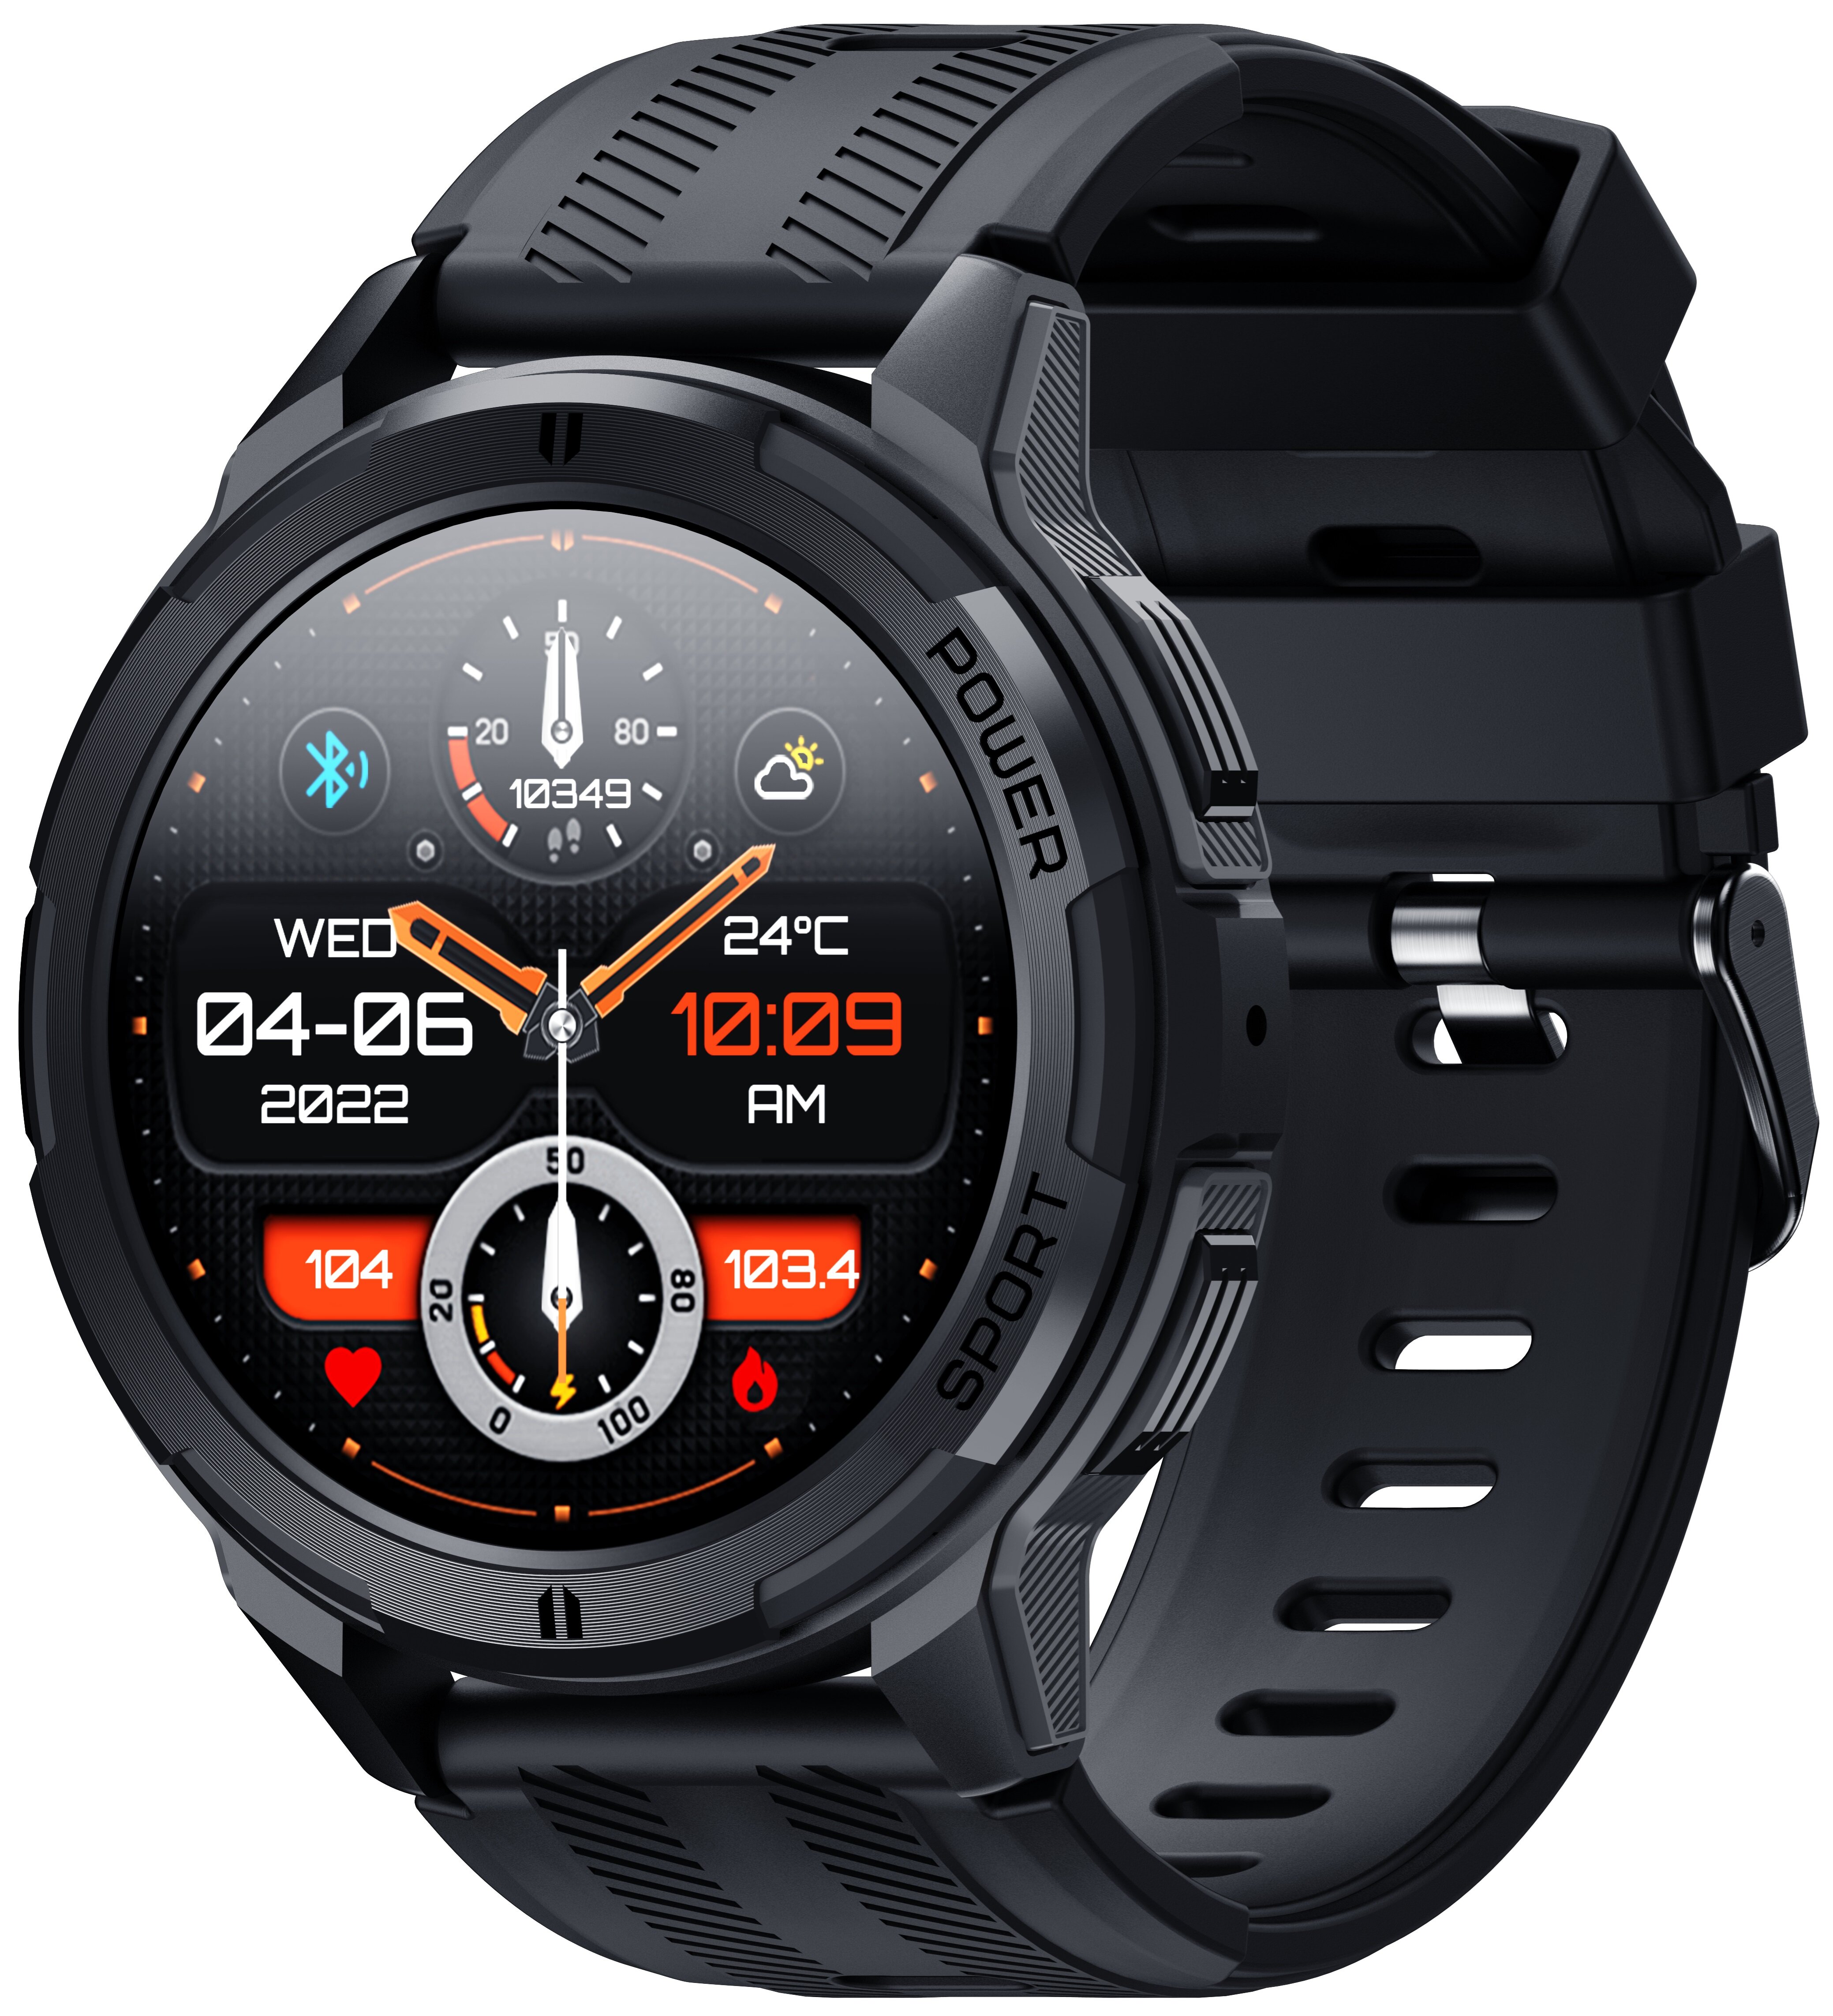  OUKITEL BT10 Military Smart Watch for Men(Answer/Dial),5ATM  Waterproof Rugged Fitness Tracker Smartwatch,1.43'AMOLED HD  Display,Tactical Sports Watch,123+Sport Modes,24H Health Monitor,for  iOS/Android : Electronics